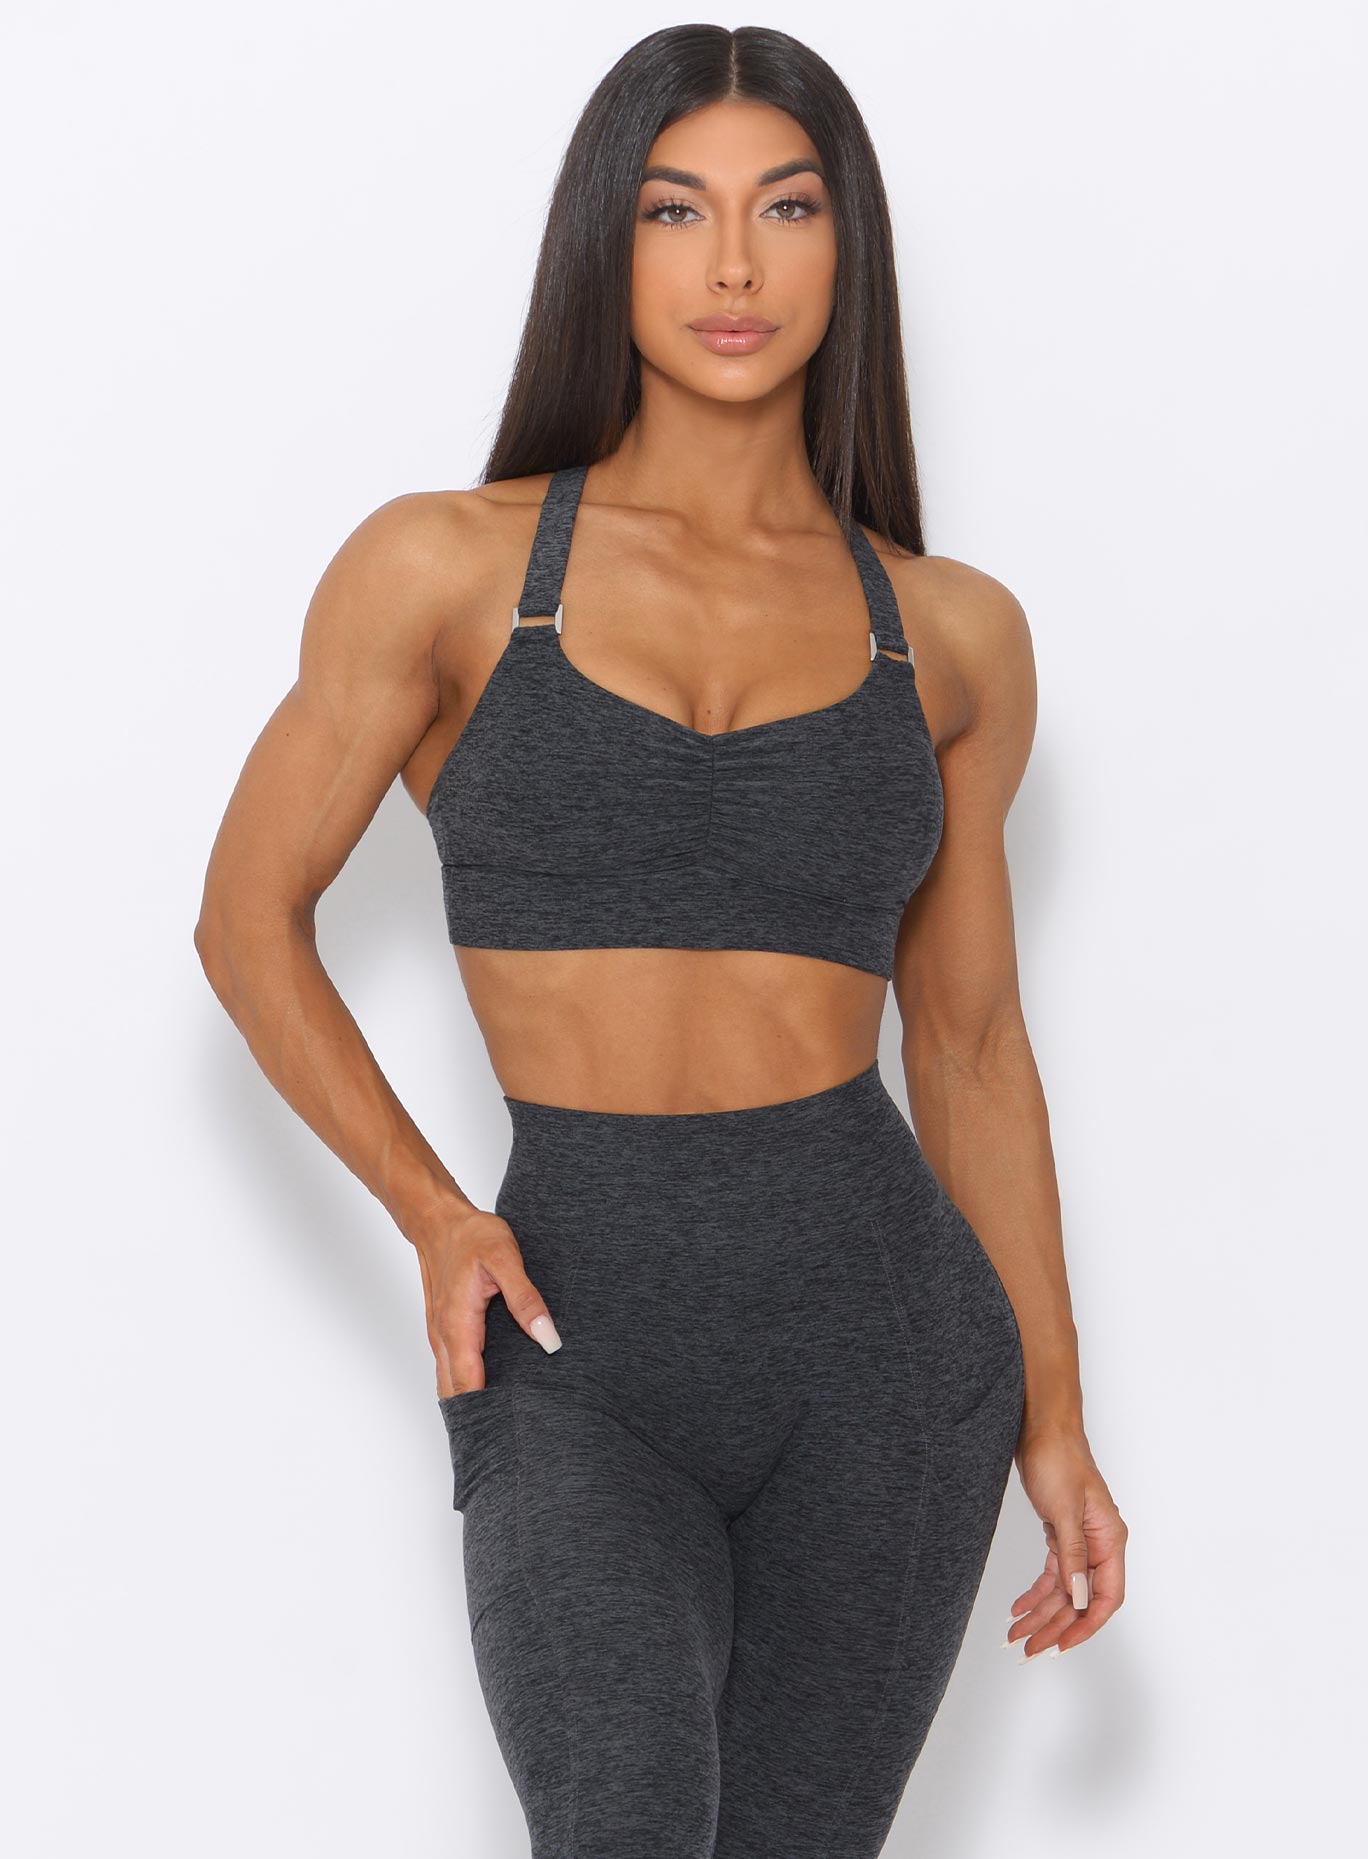 Front view of the model with her right hand on waist wearing our perfection sports bra in charcoal color and a matching leggings